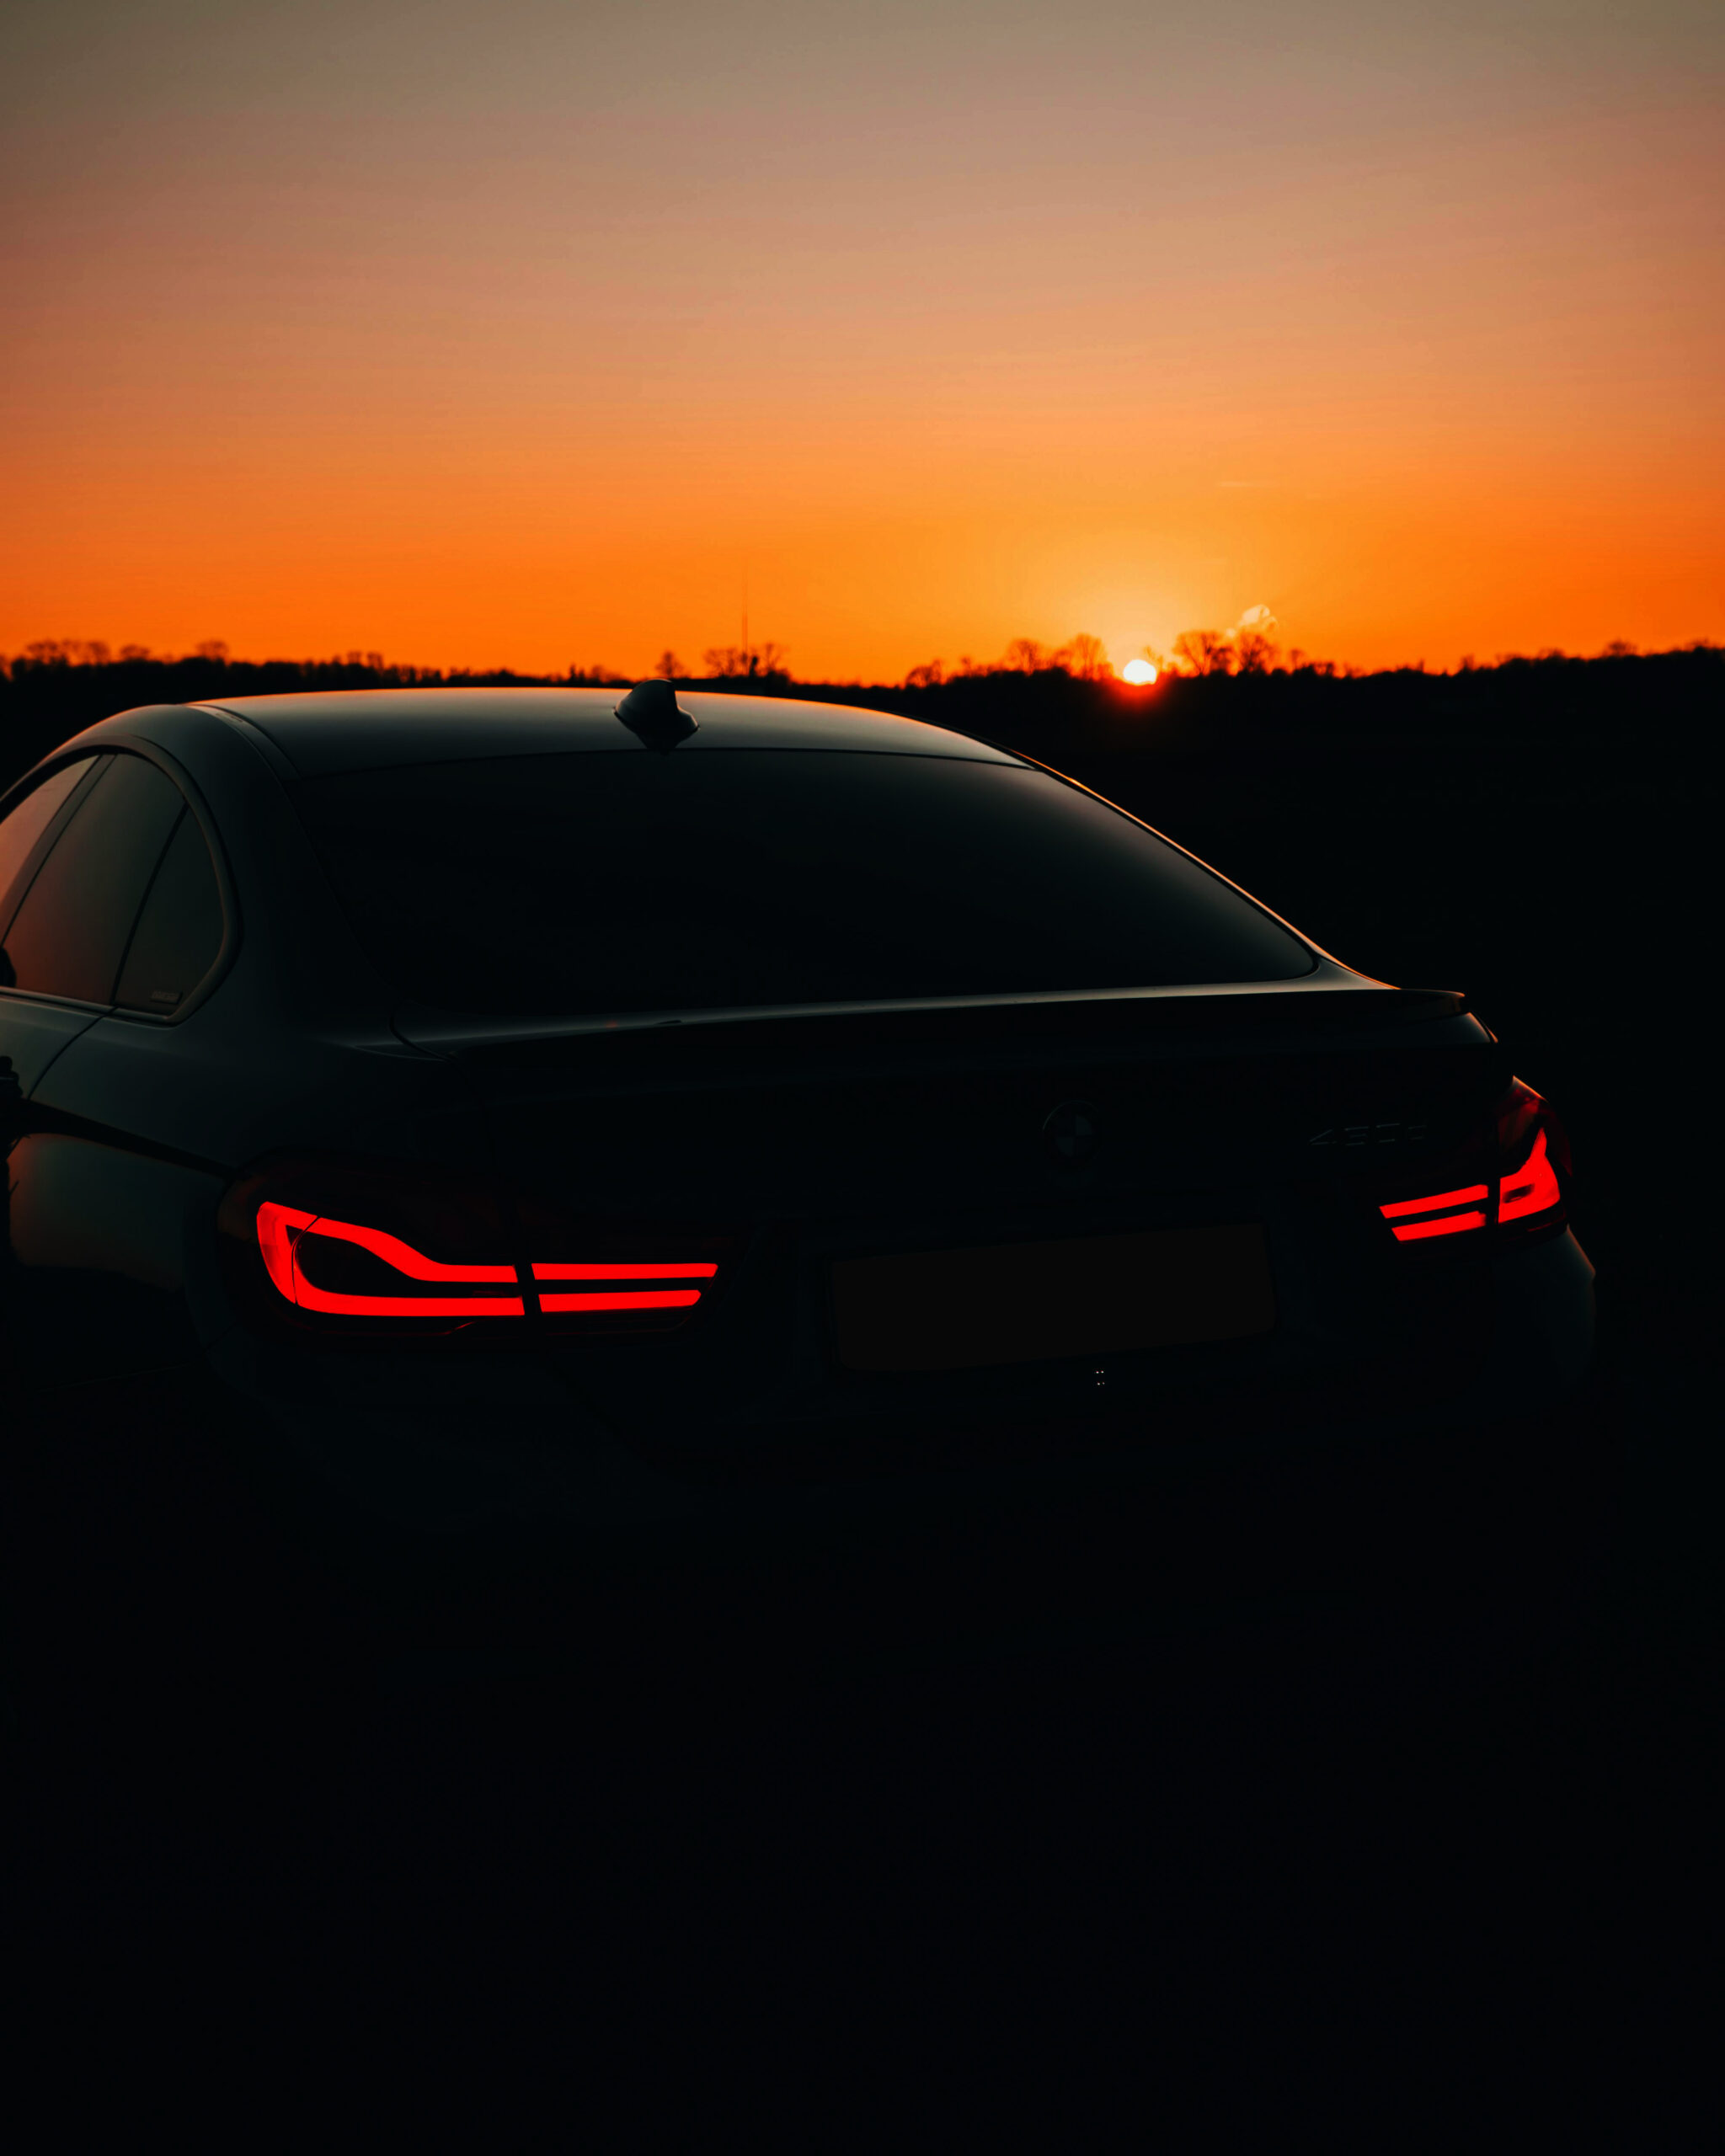 Rear lights in a sunset